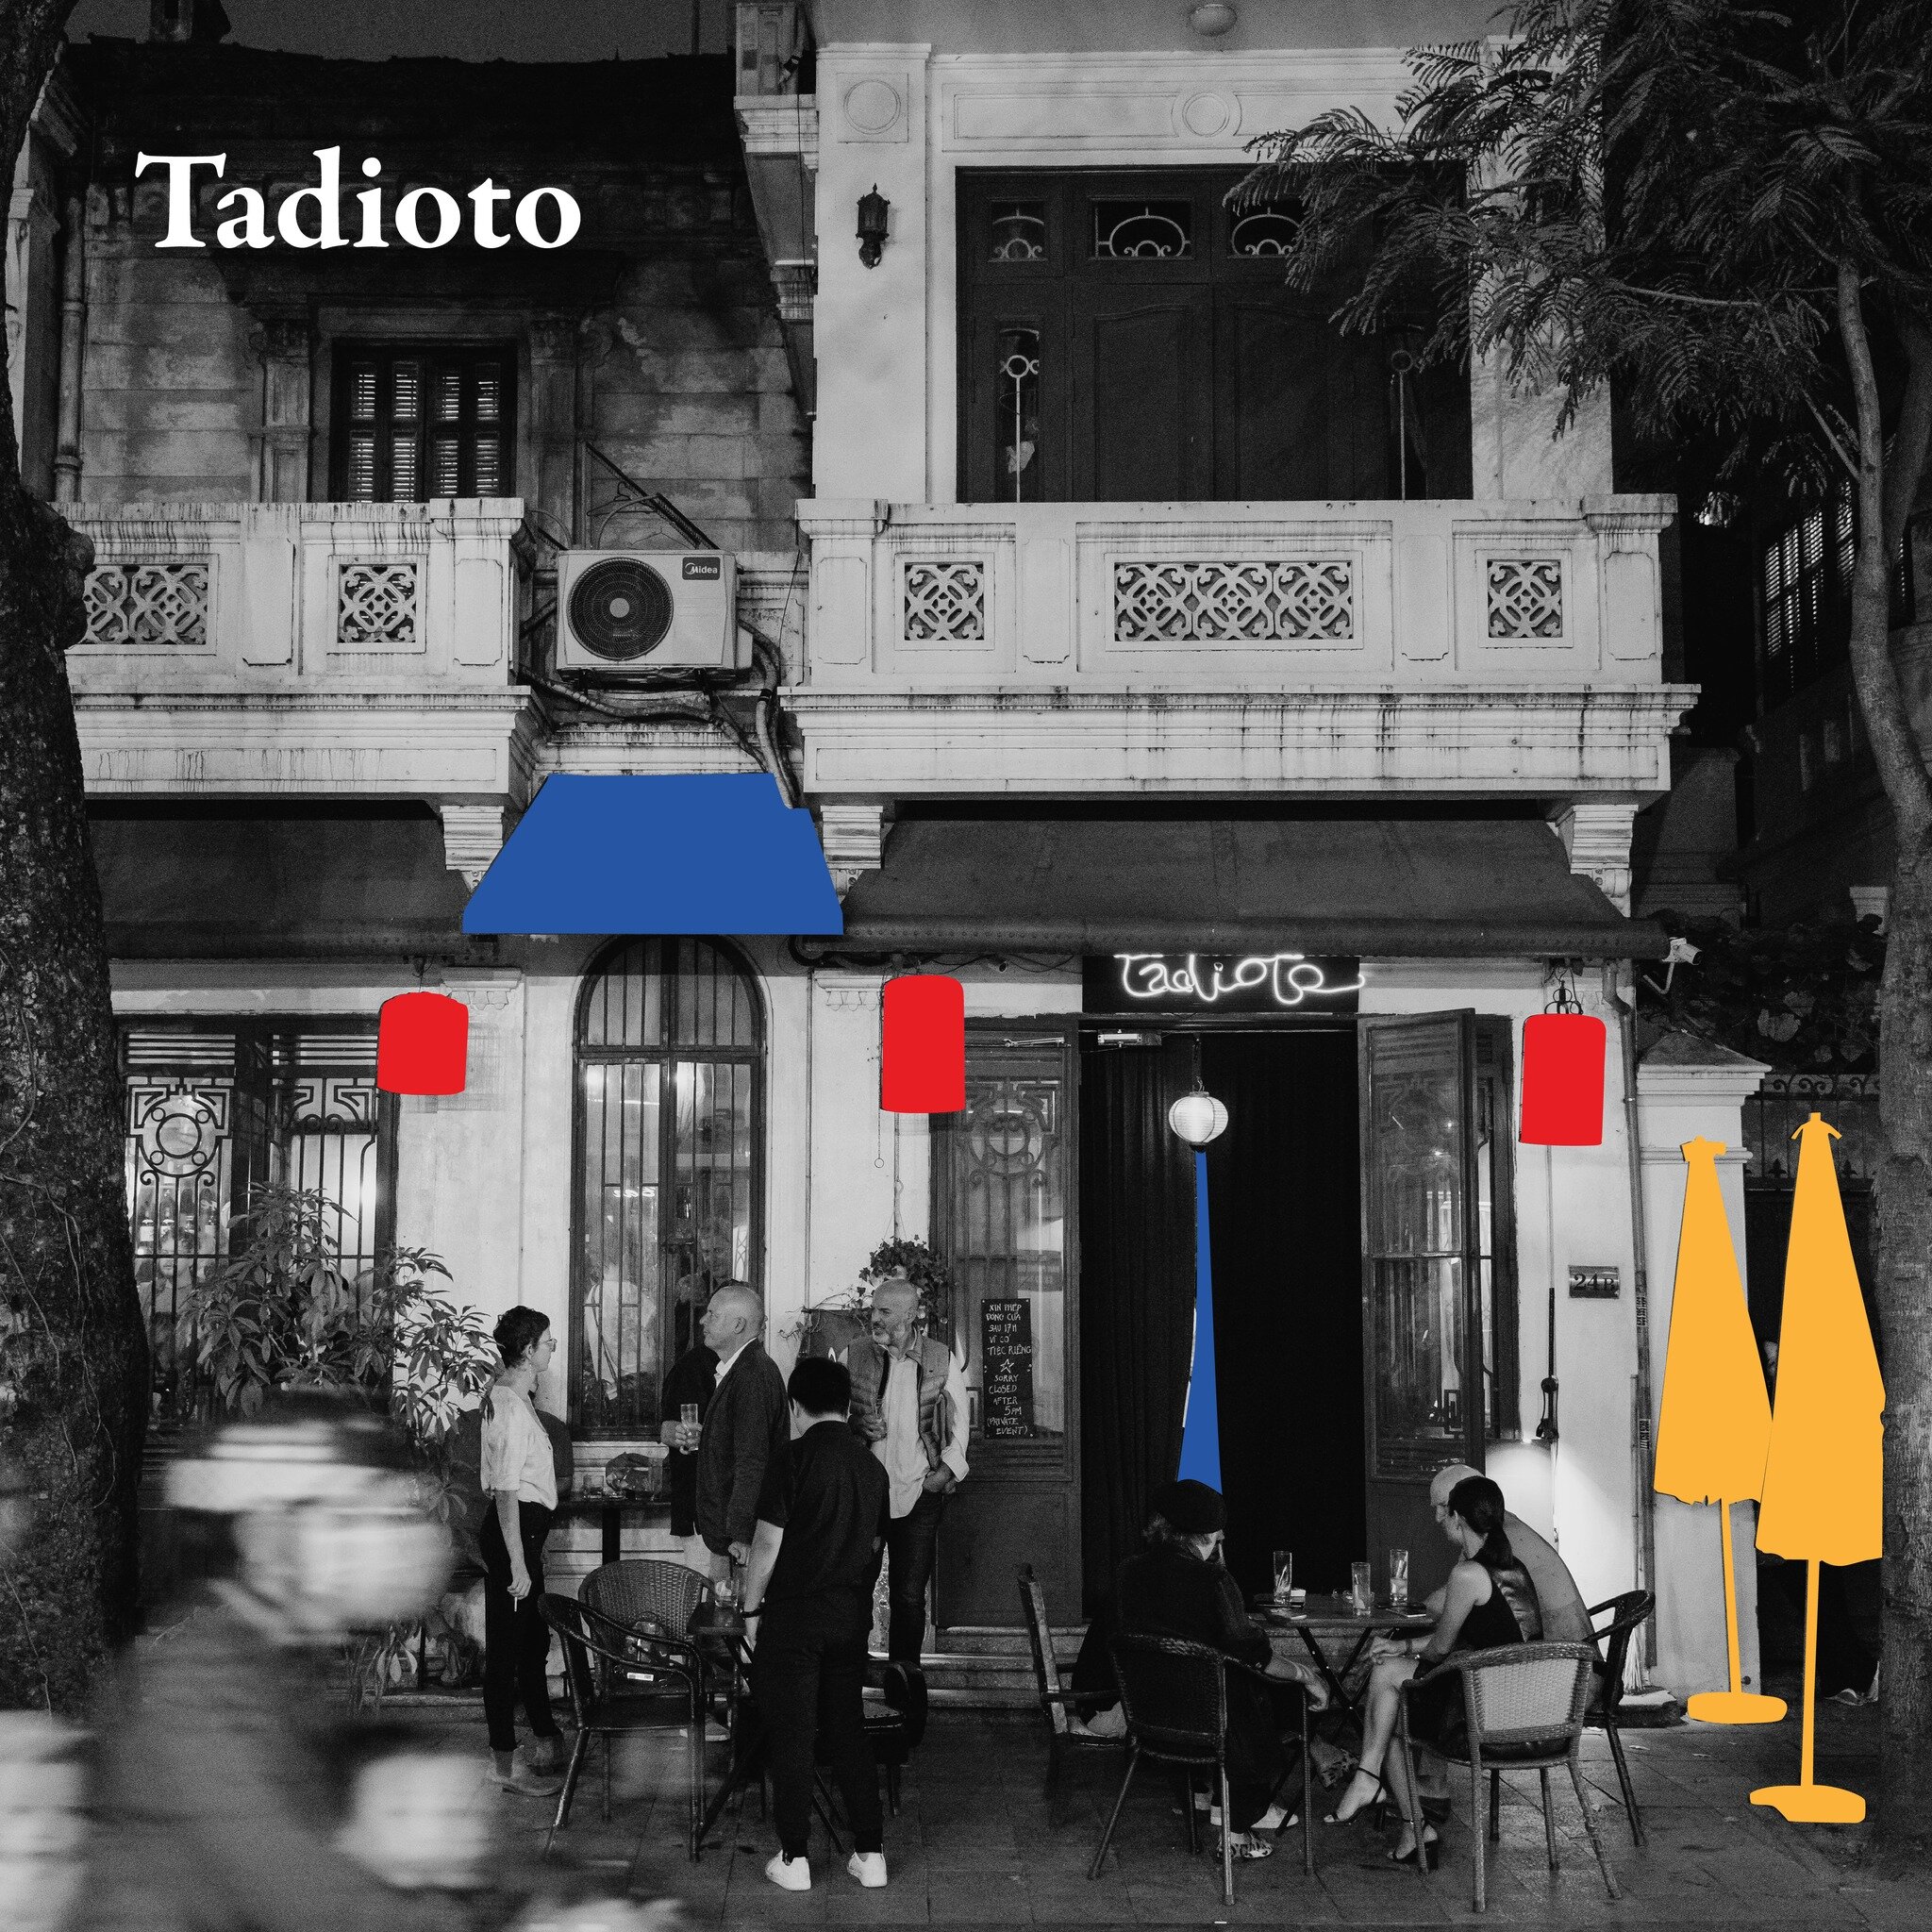 If a bar could be considered a Hanoi landmark, it would be Tadioto. Since 2008, Tadioto has hosted the city's poets, dreamers, artists, and chancers, as long as anyone who calls this city home can remember. Over the years, many bars have opened and s